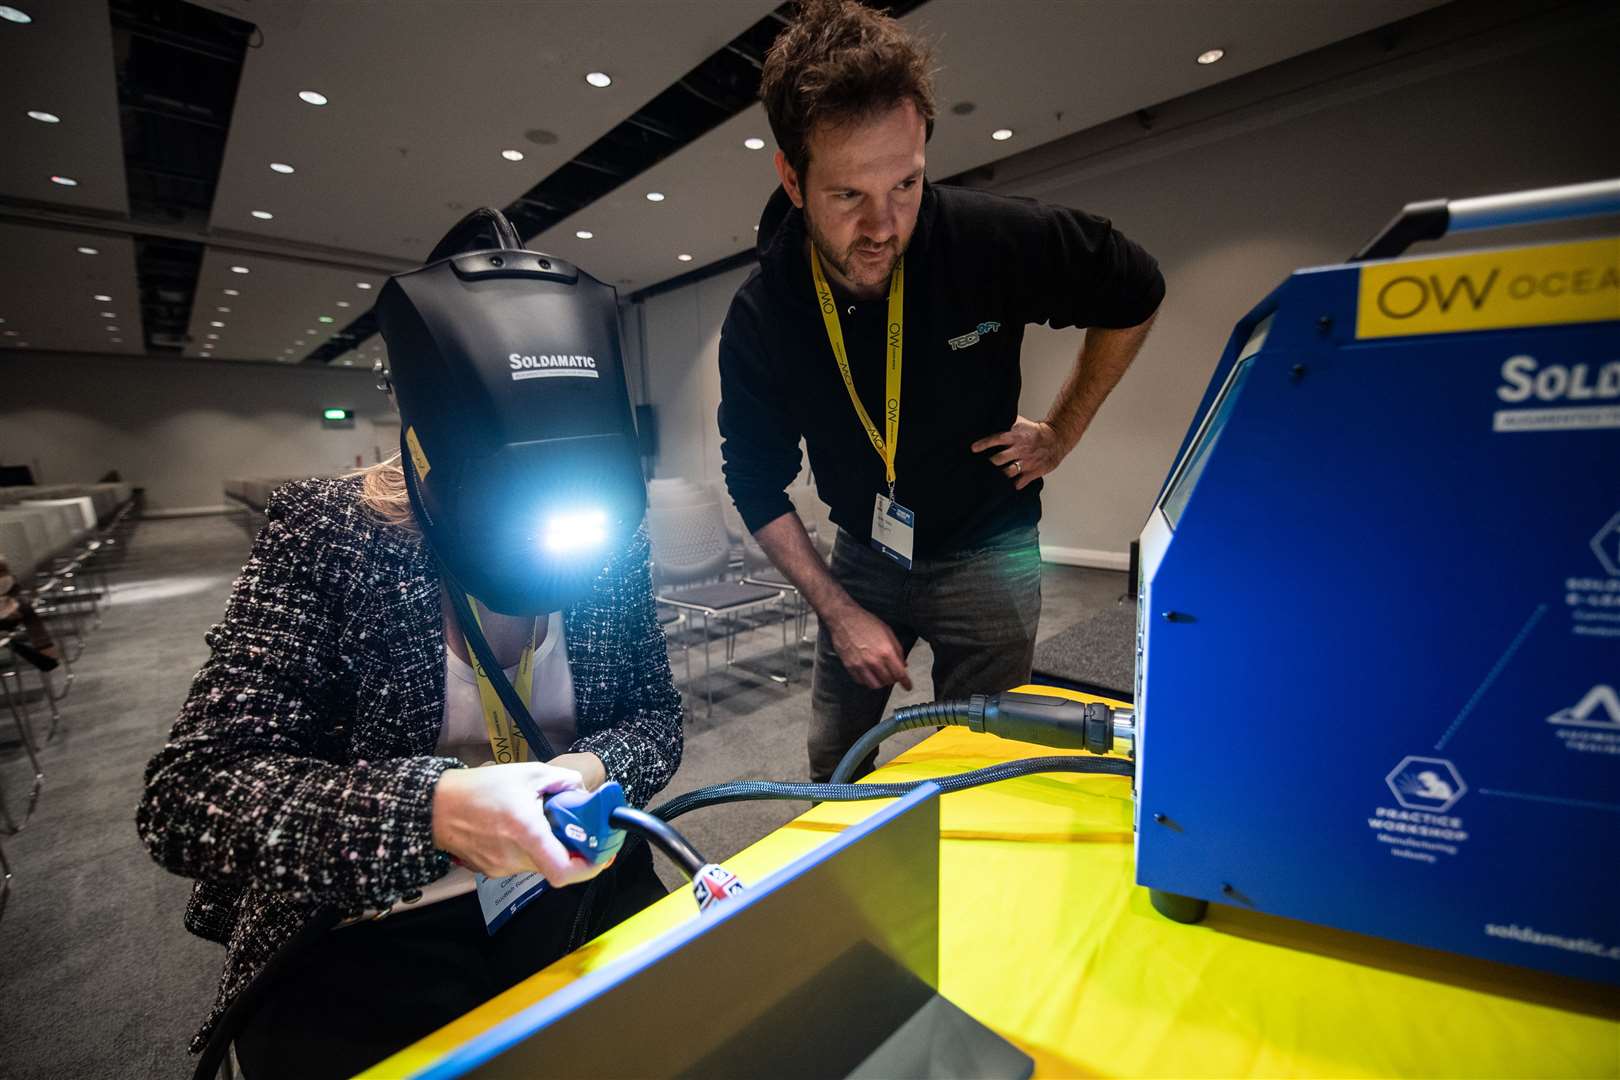 Claire Mack, chief executive of Scottish Renewables, tries her hand at augmented reality welding during Scottish Renewables' Offshore Wind Conference in Glasgow.